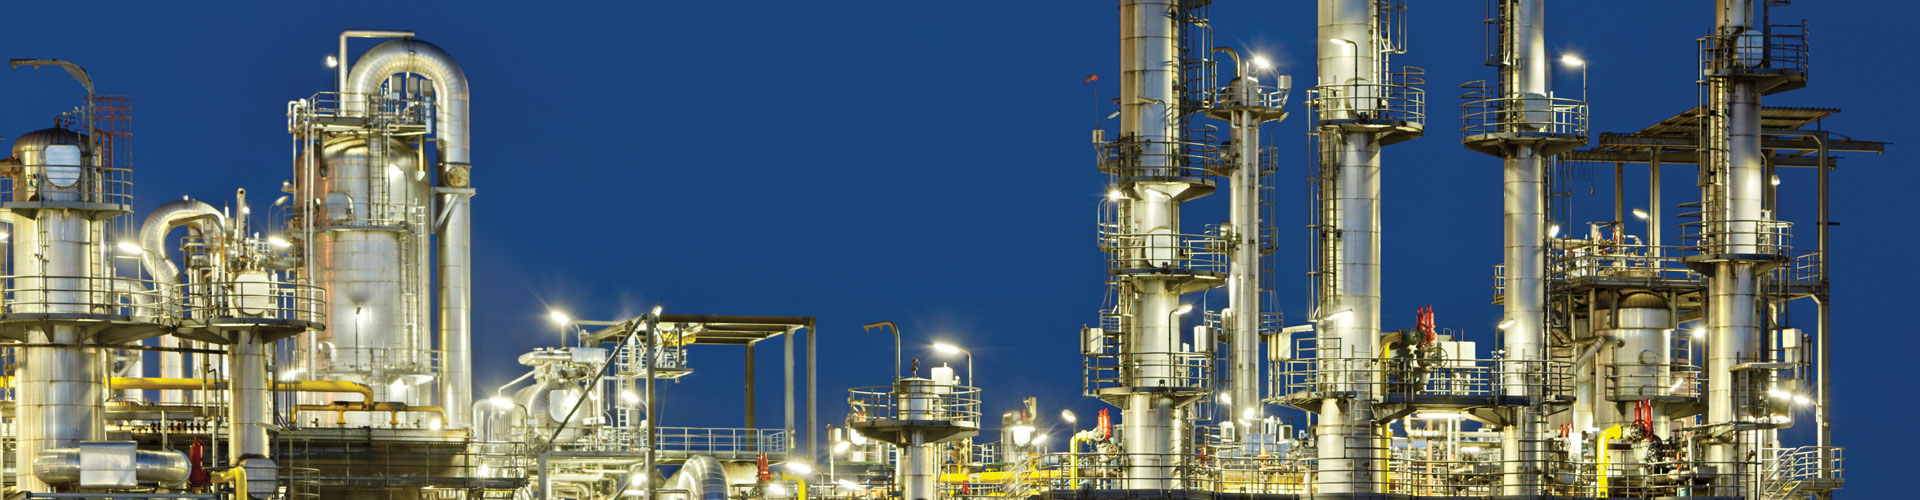 Oil and Gas Refinery Banner